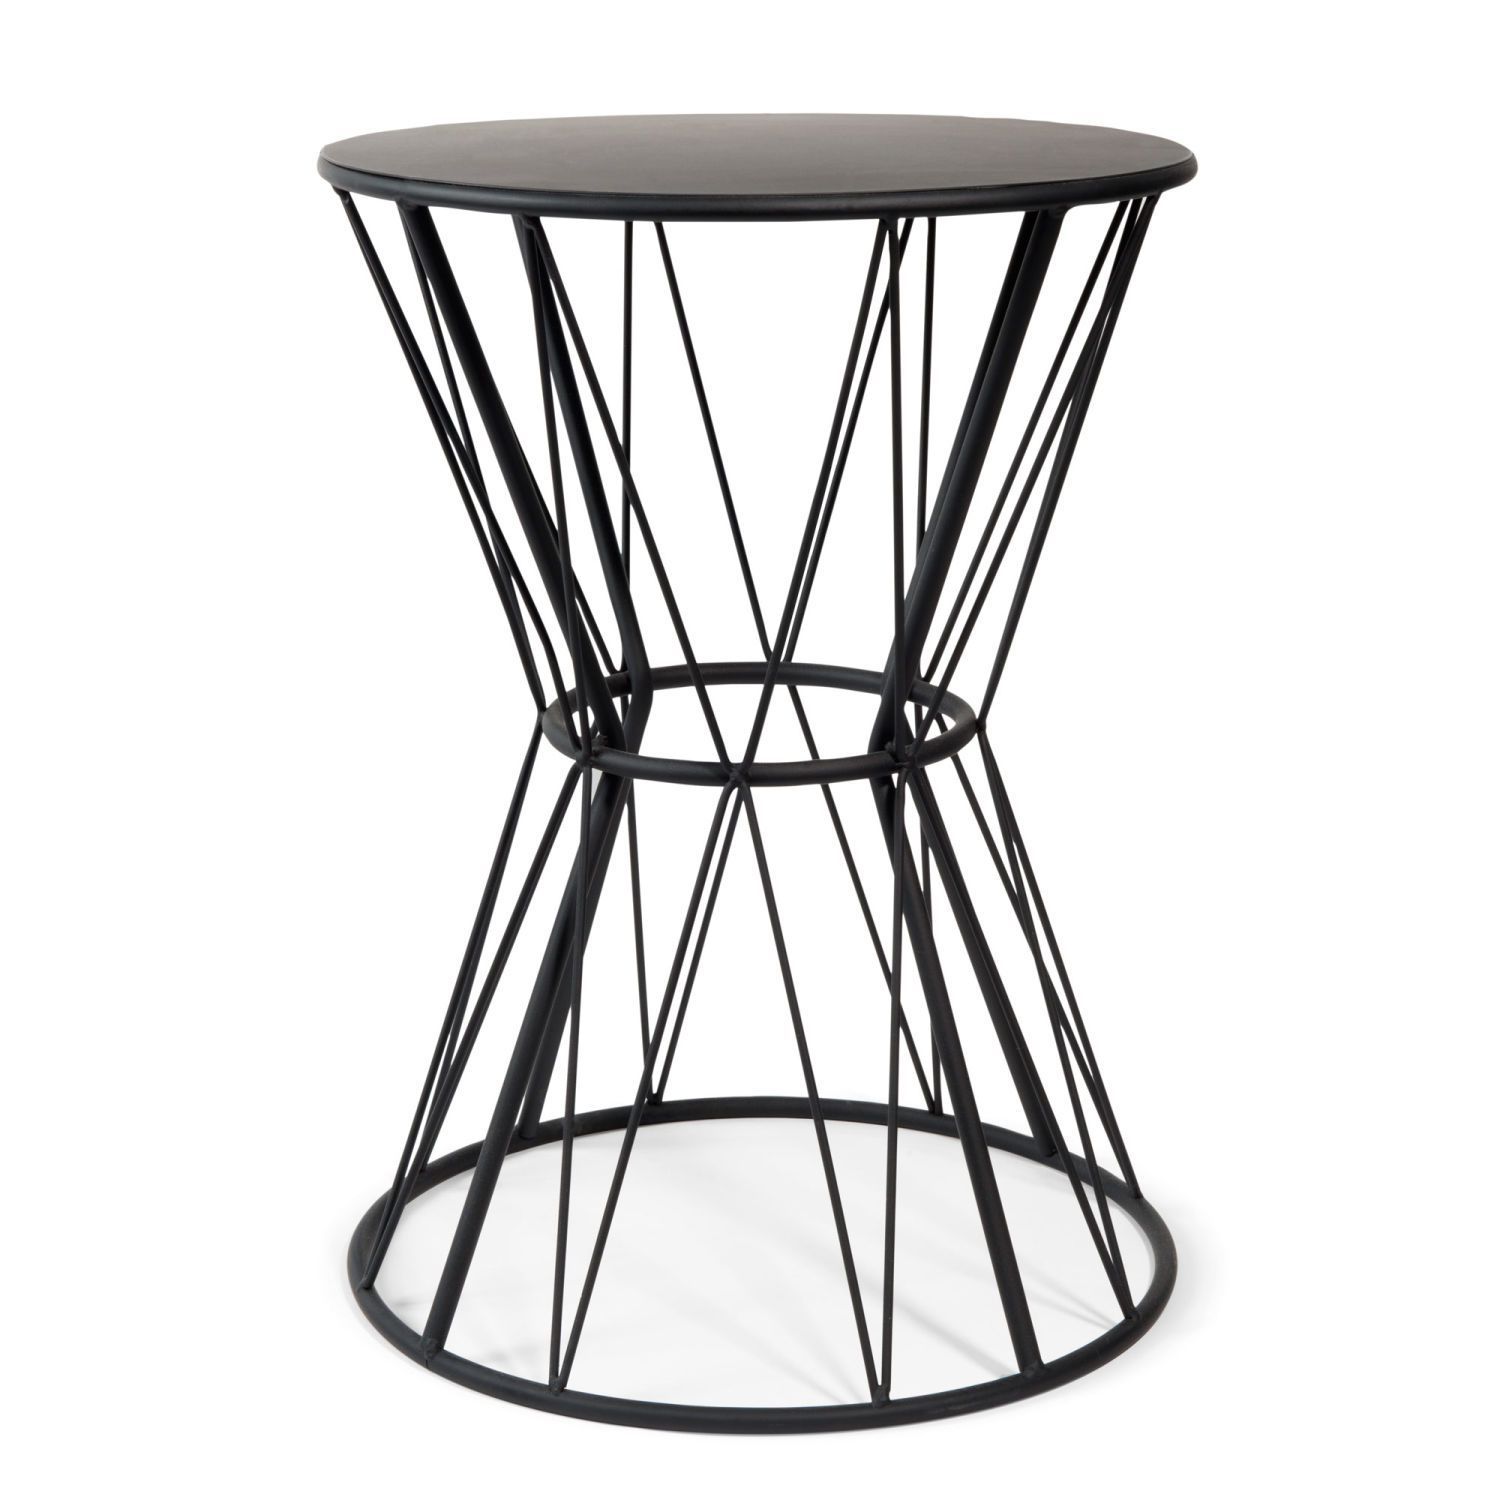 Black Metal End Table | Maisons Du Monde | Metal End Tables, Metal Sofa Intended For Metal Side Tables For Living Spaces (Gallery 19 of 20)